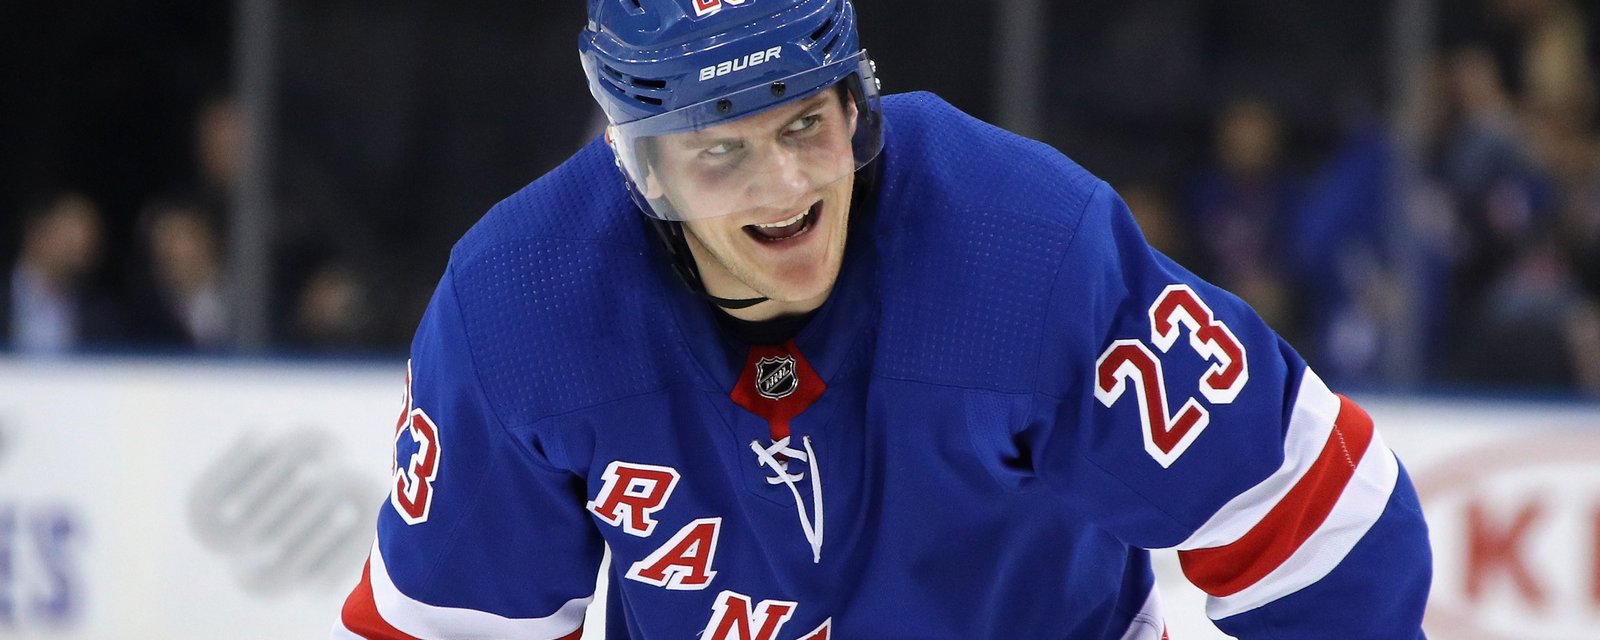 Rangers’ Fox with ruthless move before puck drop vs. Islanders 